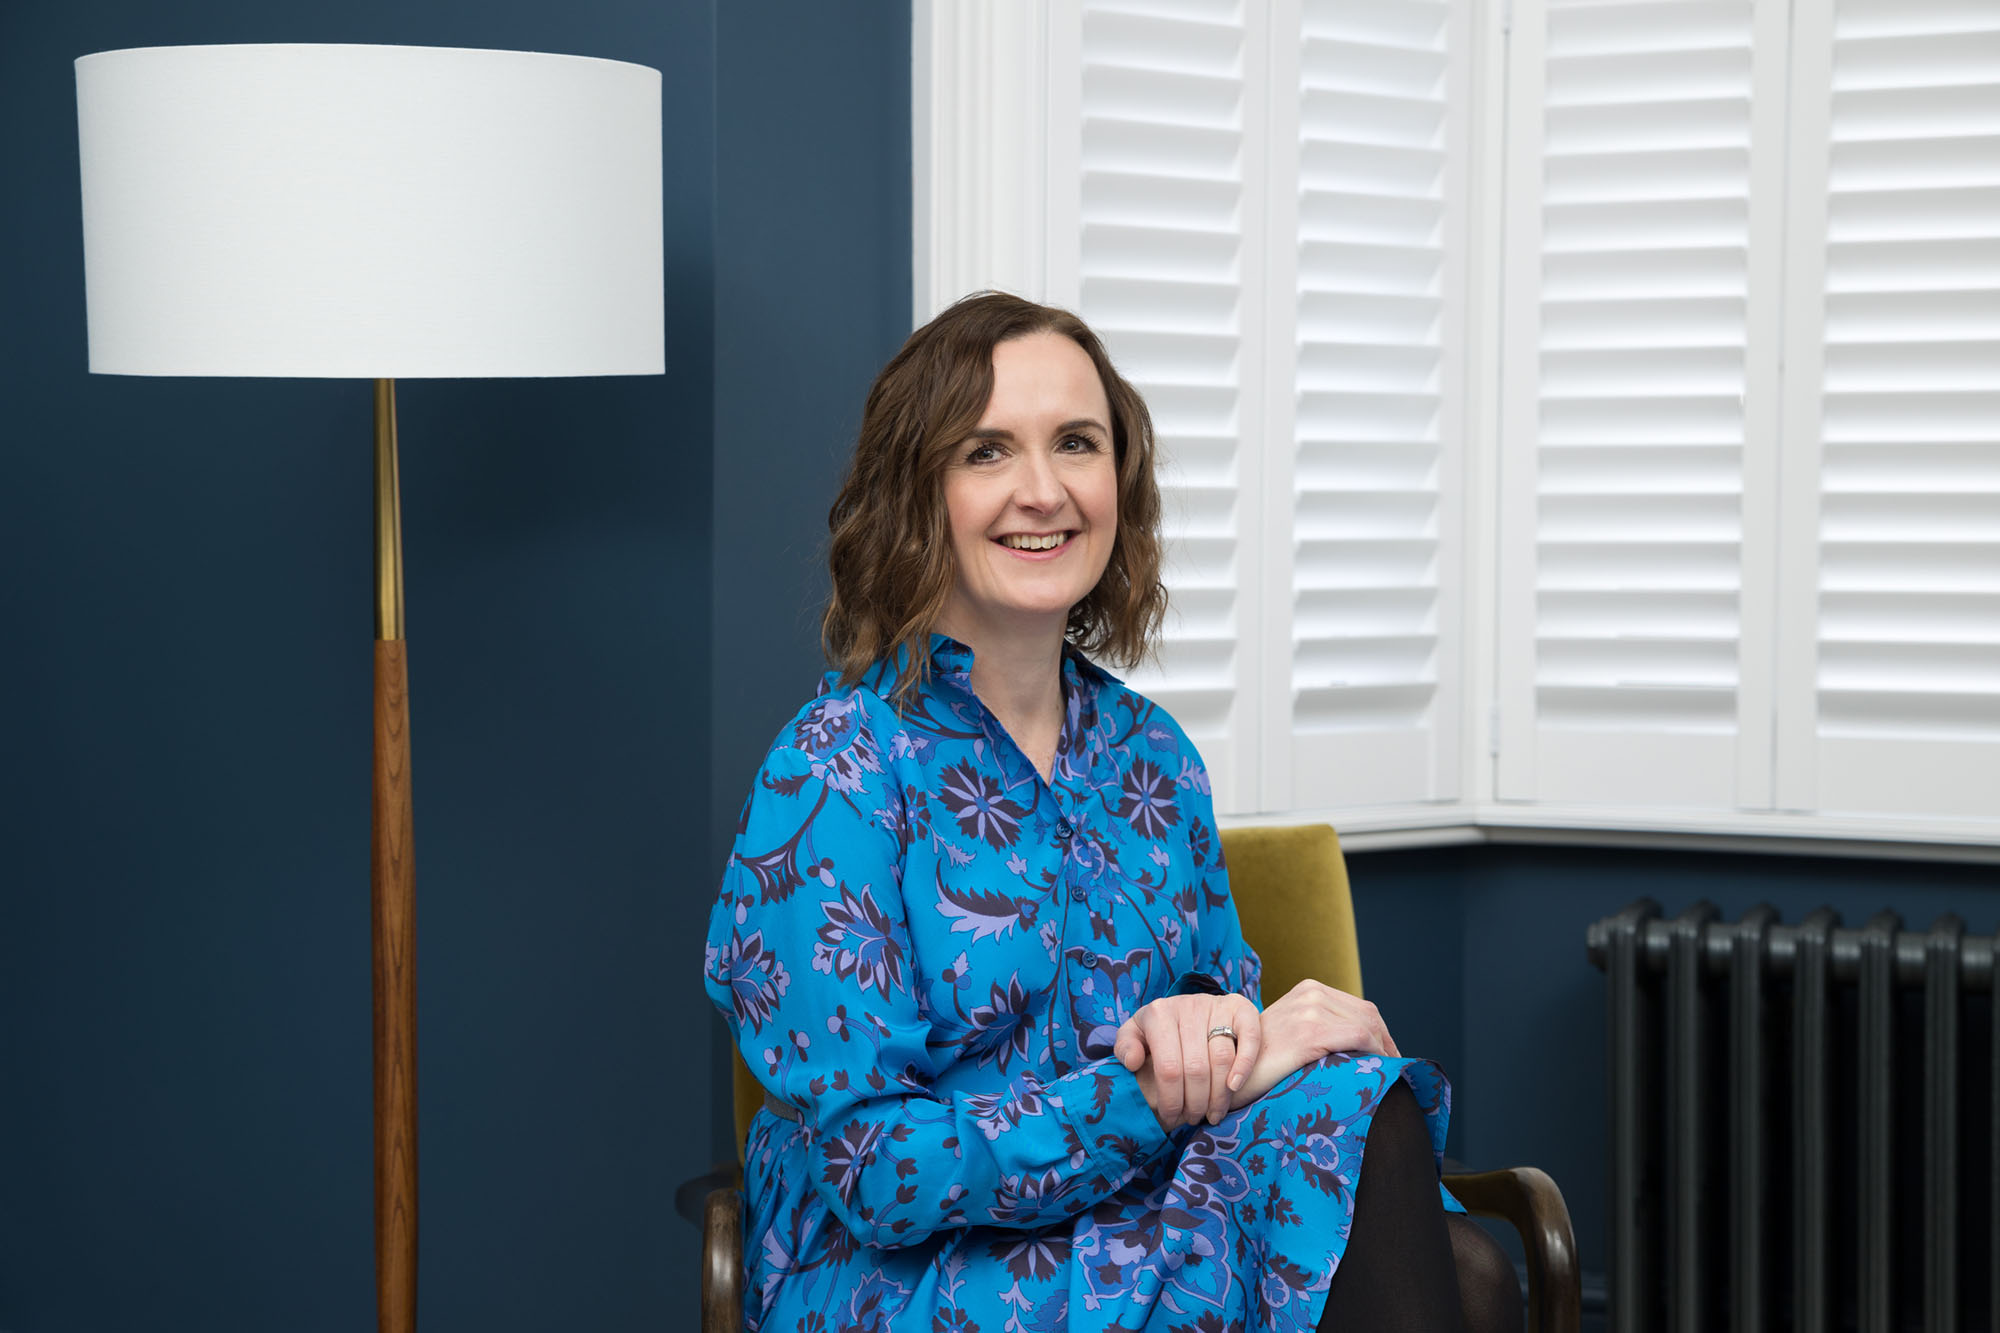 A personal branding photography image of a woman sitting in front of a blue wall in a Croydon house.